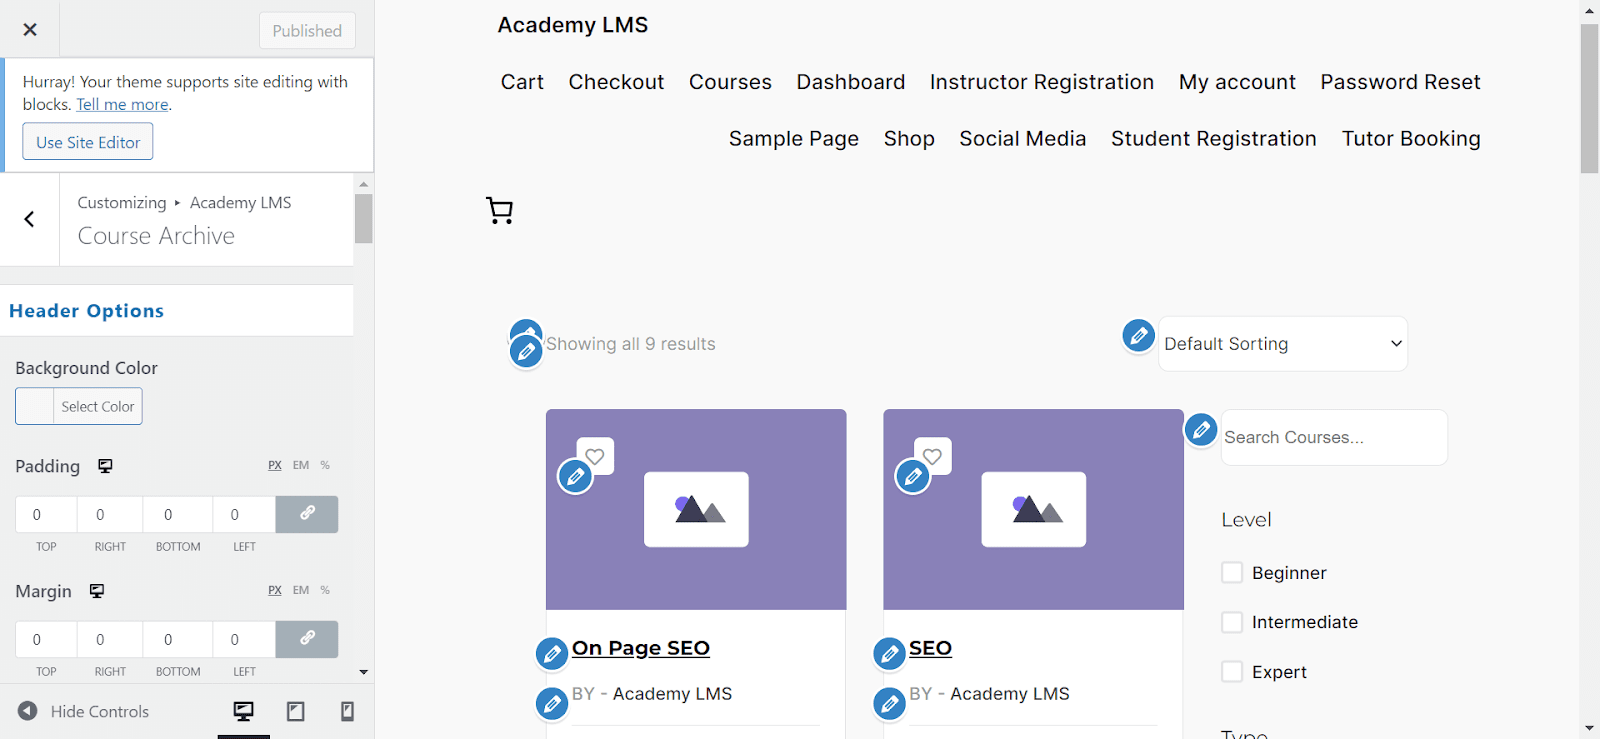 Customize academy LMS course Course Archive Style. 